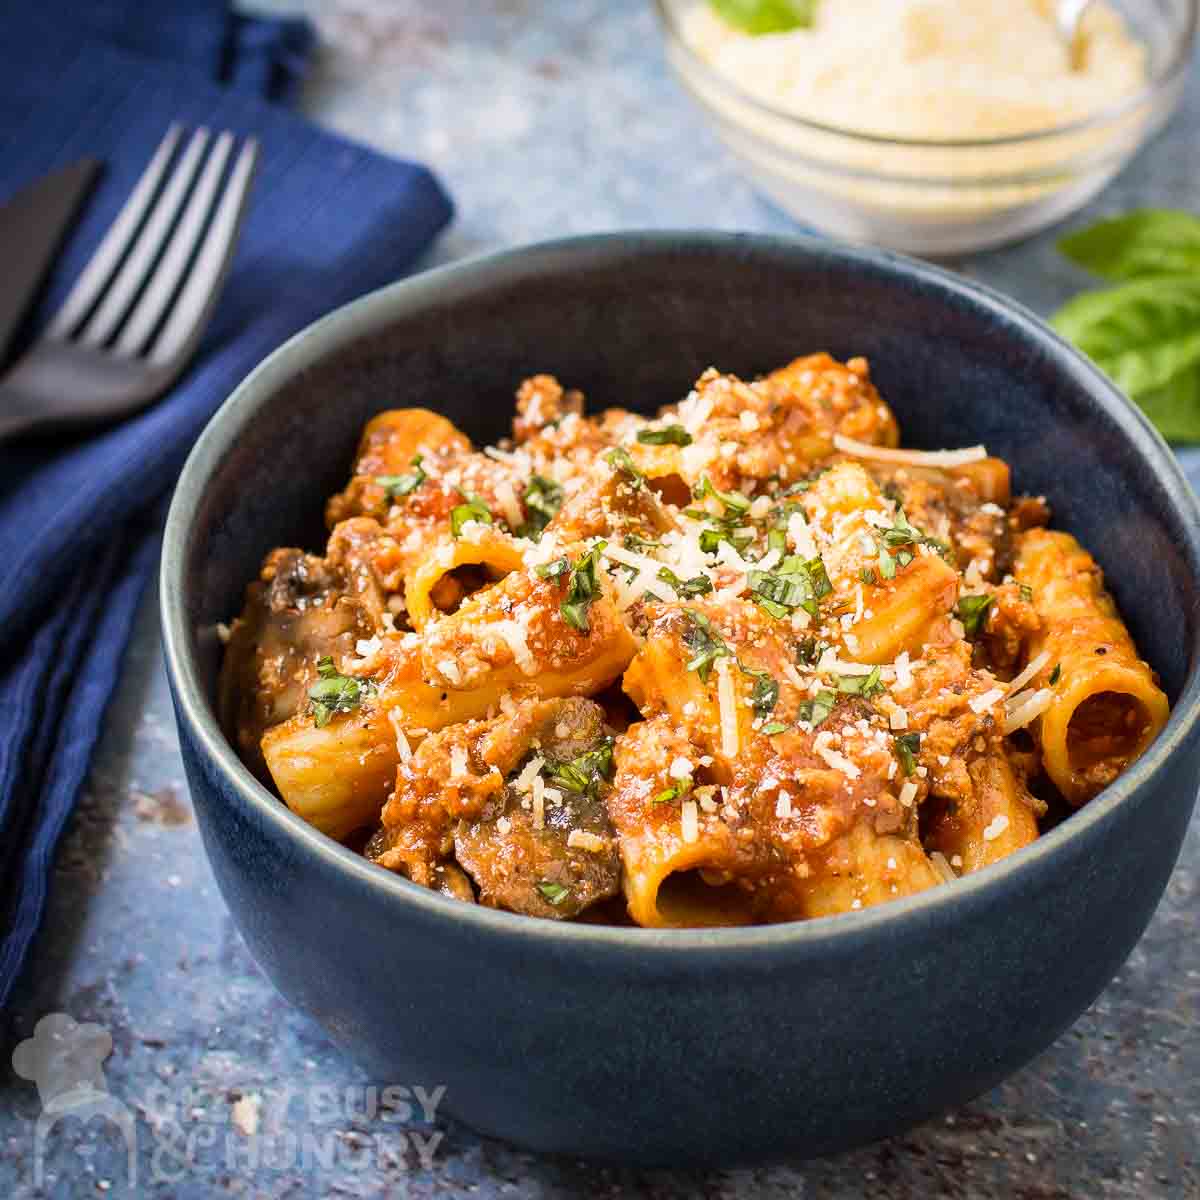 Side shot of rigatoni garnished with cheese and herbs in a blue bowl on a blue speckled surface with a cloth and silverware on the side.